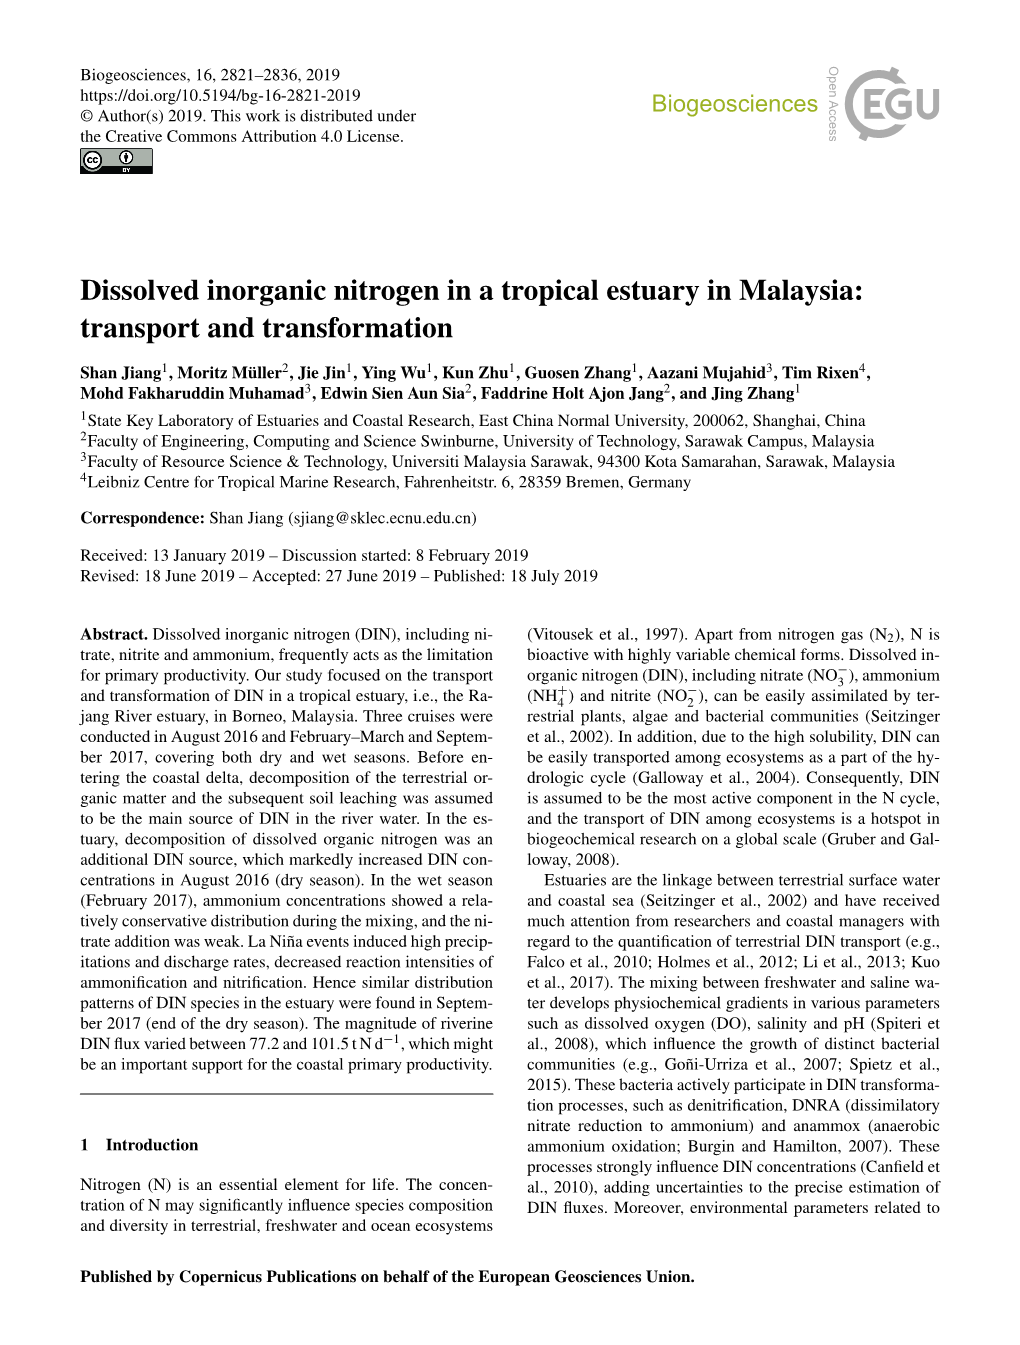 Dissolved Inorganic Nitrogen in a Tropical Estuary in Malaysia: Transport and Transformation